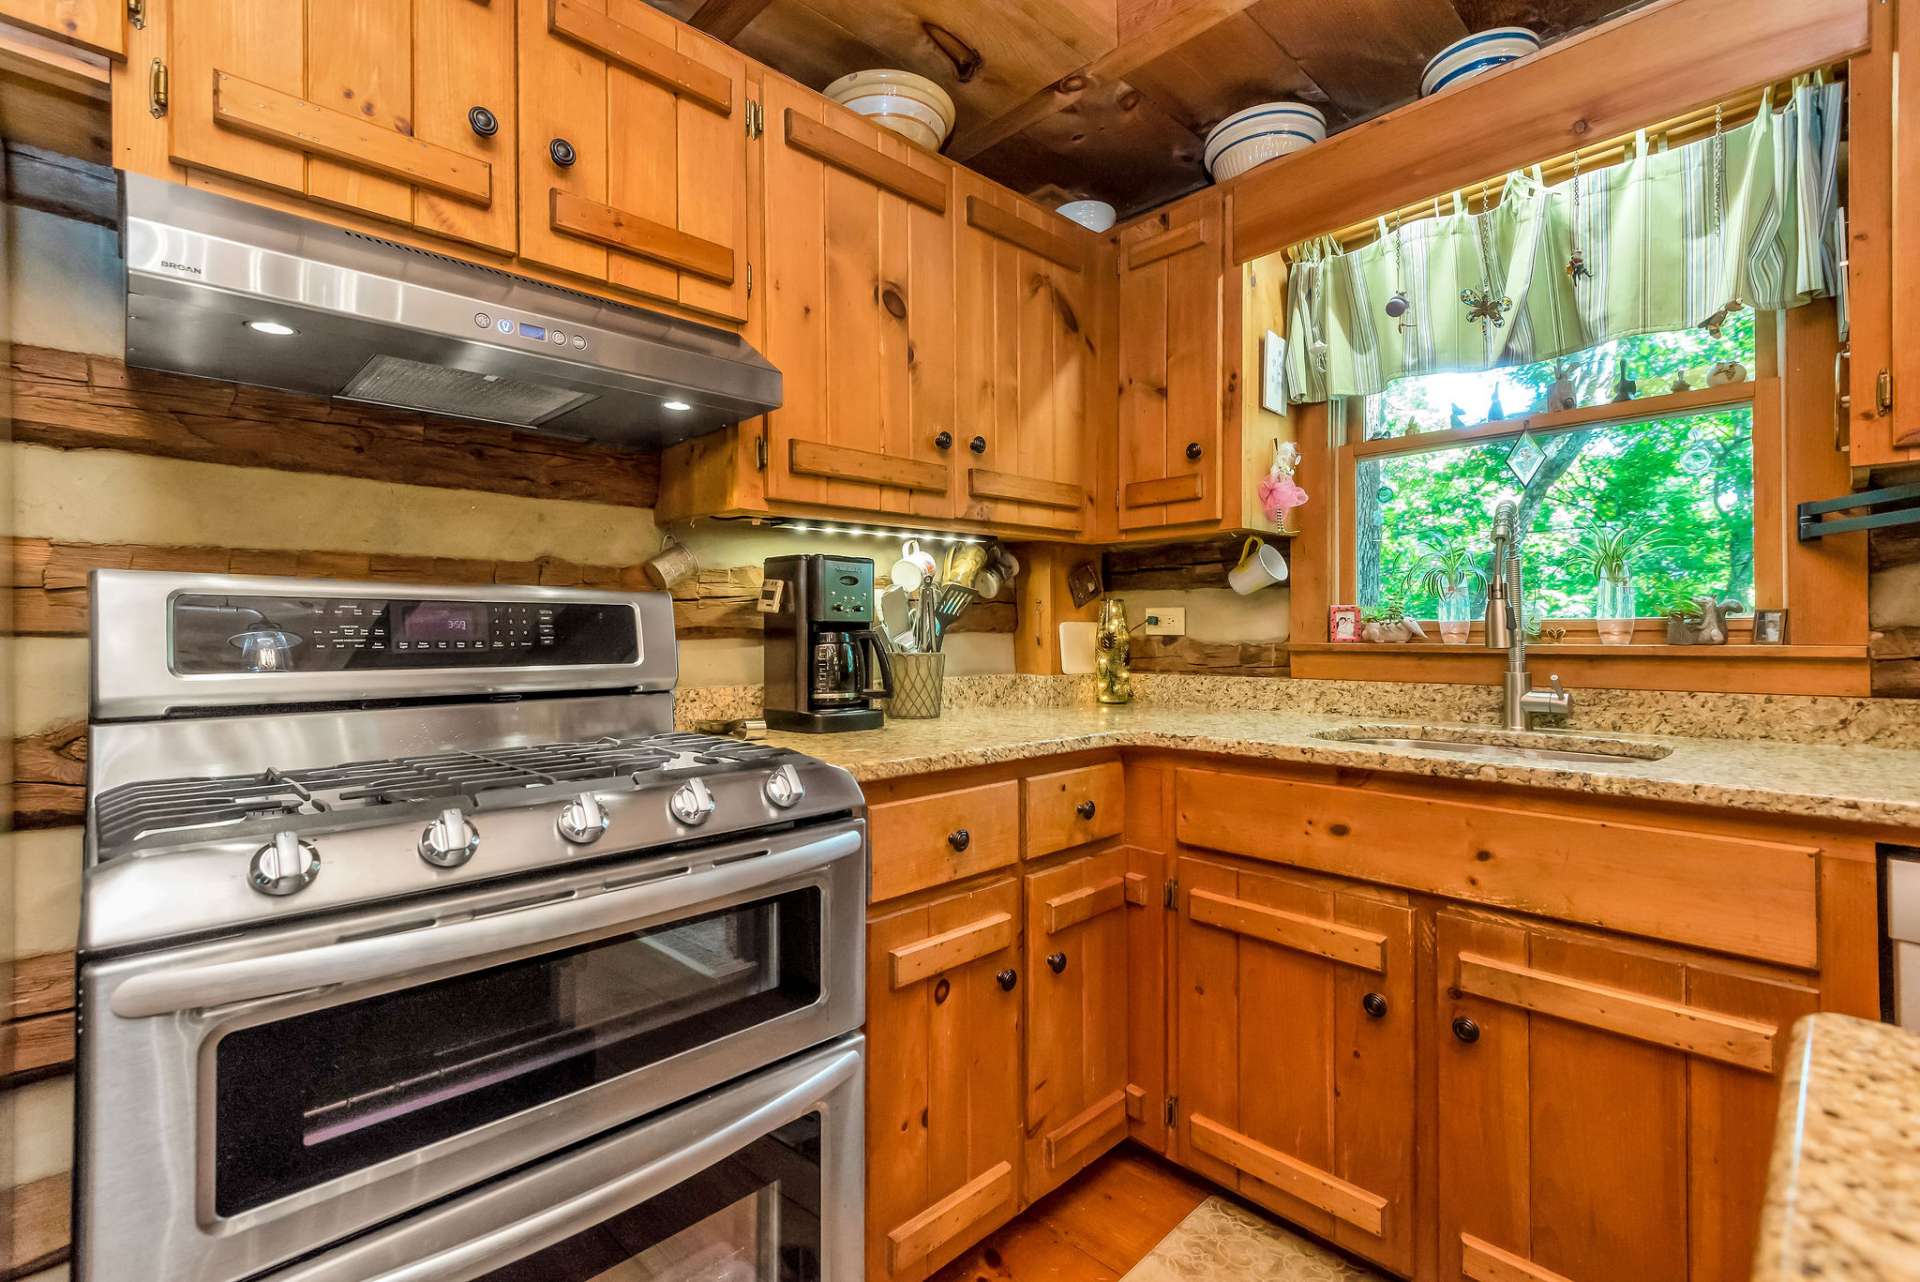 Featuring all of life's modern conveniences: stainless appliances including a convection gas range with double ovens, and granite counter tops.